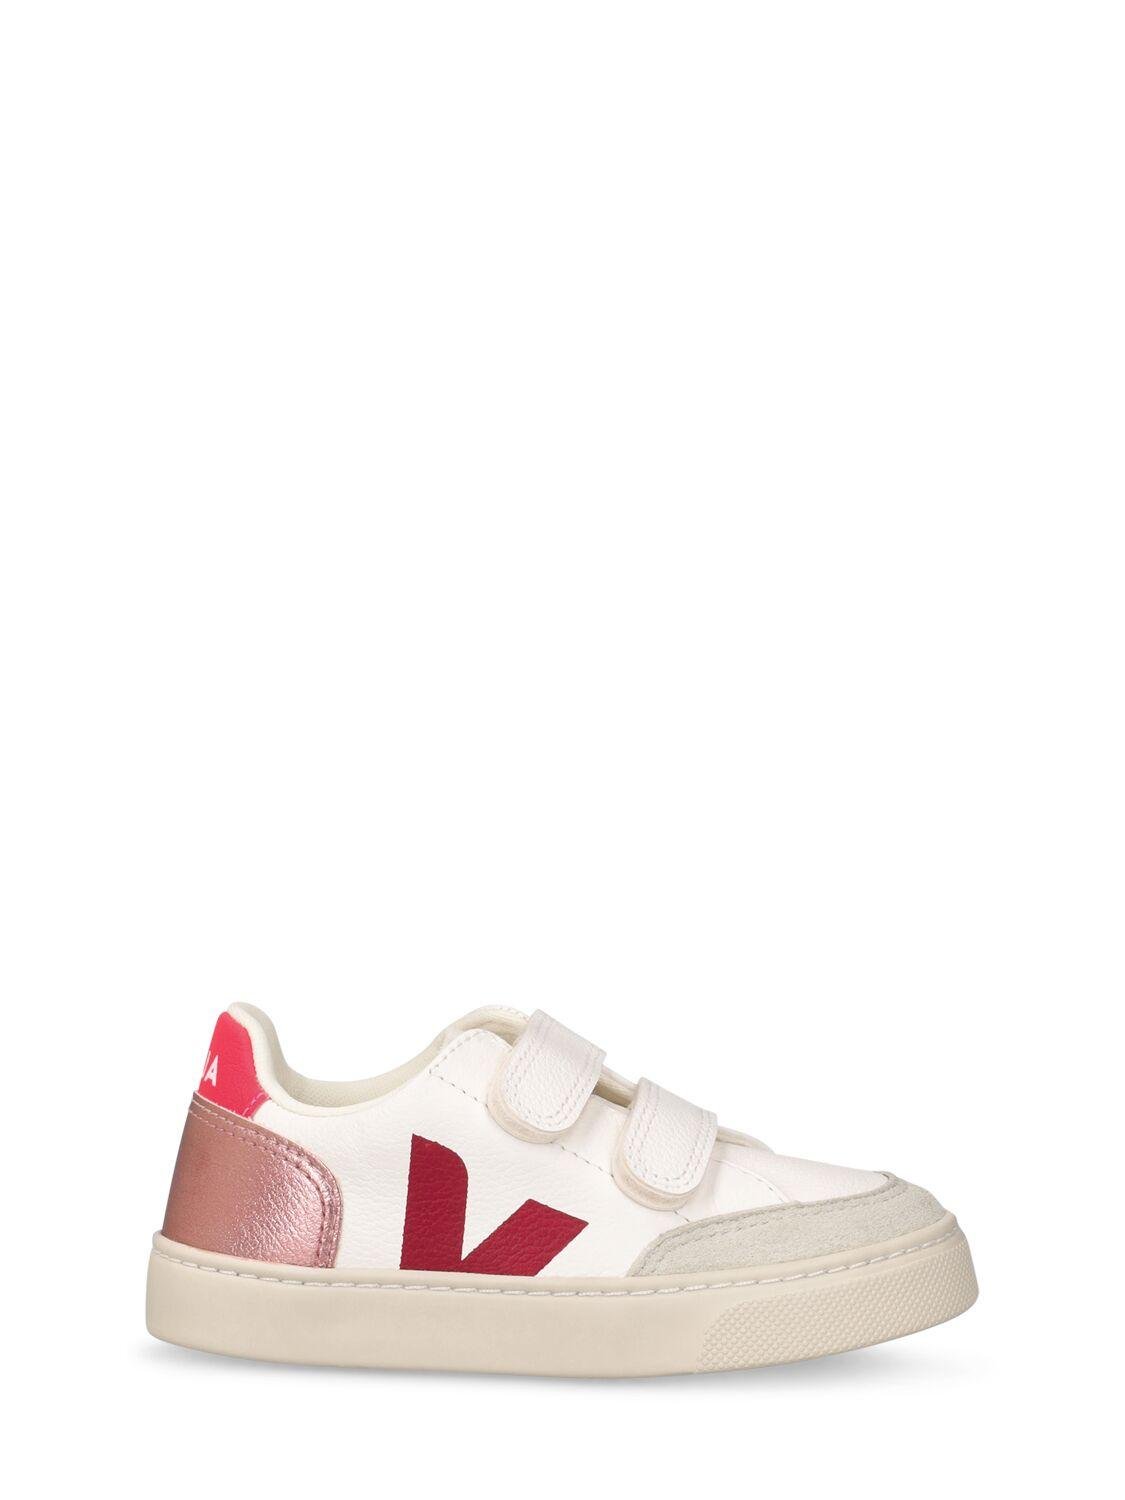 V-12 Chrome-free Leather Strap Sneakers by VEJA